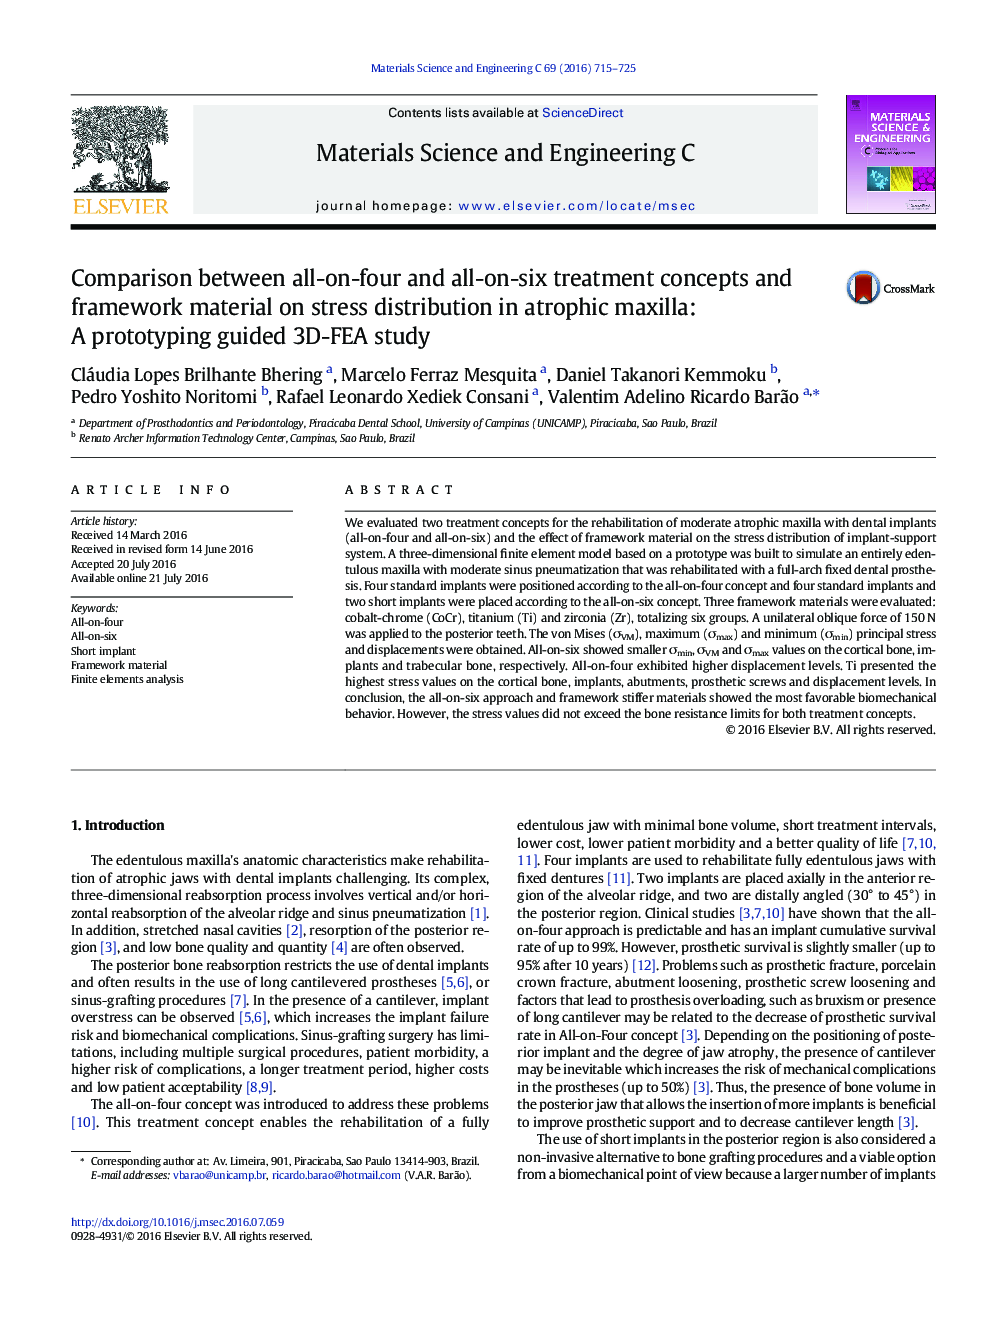 Comparison between all-on-four and all-on-six treatment concepts and framework material on stress distribution in atrophic maxilla: A prototyping guided 3D-FEA study